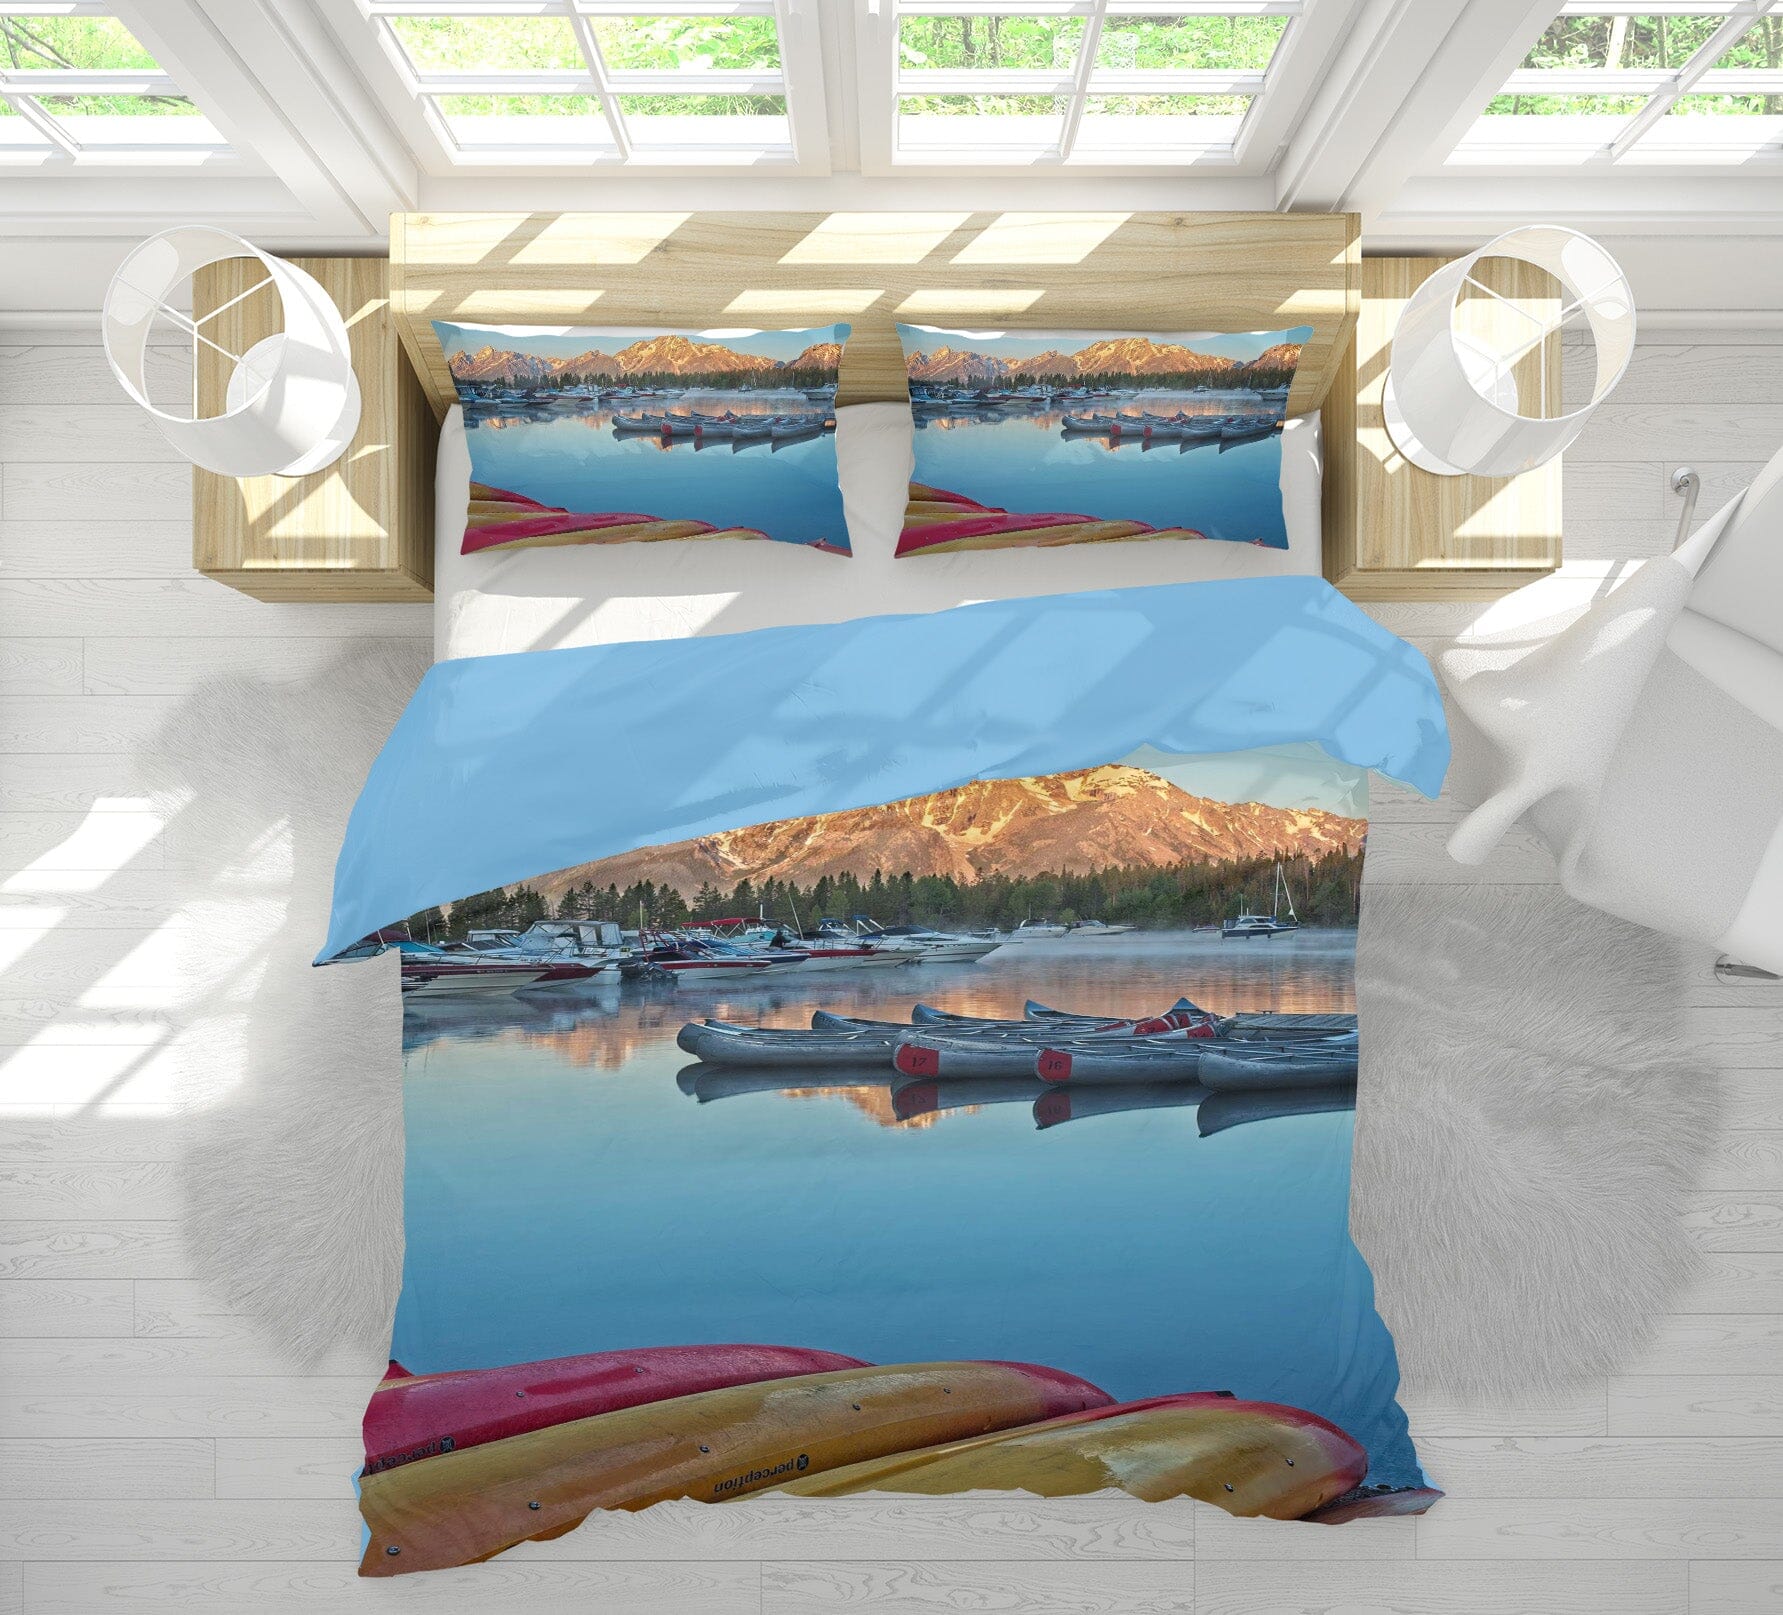 3D Waterside Mountain Peak 2132 Kathy Barefield Bedding Bed Pillowcases Quilt Quiet Covers AJ Creativity Home 